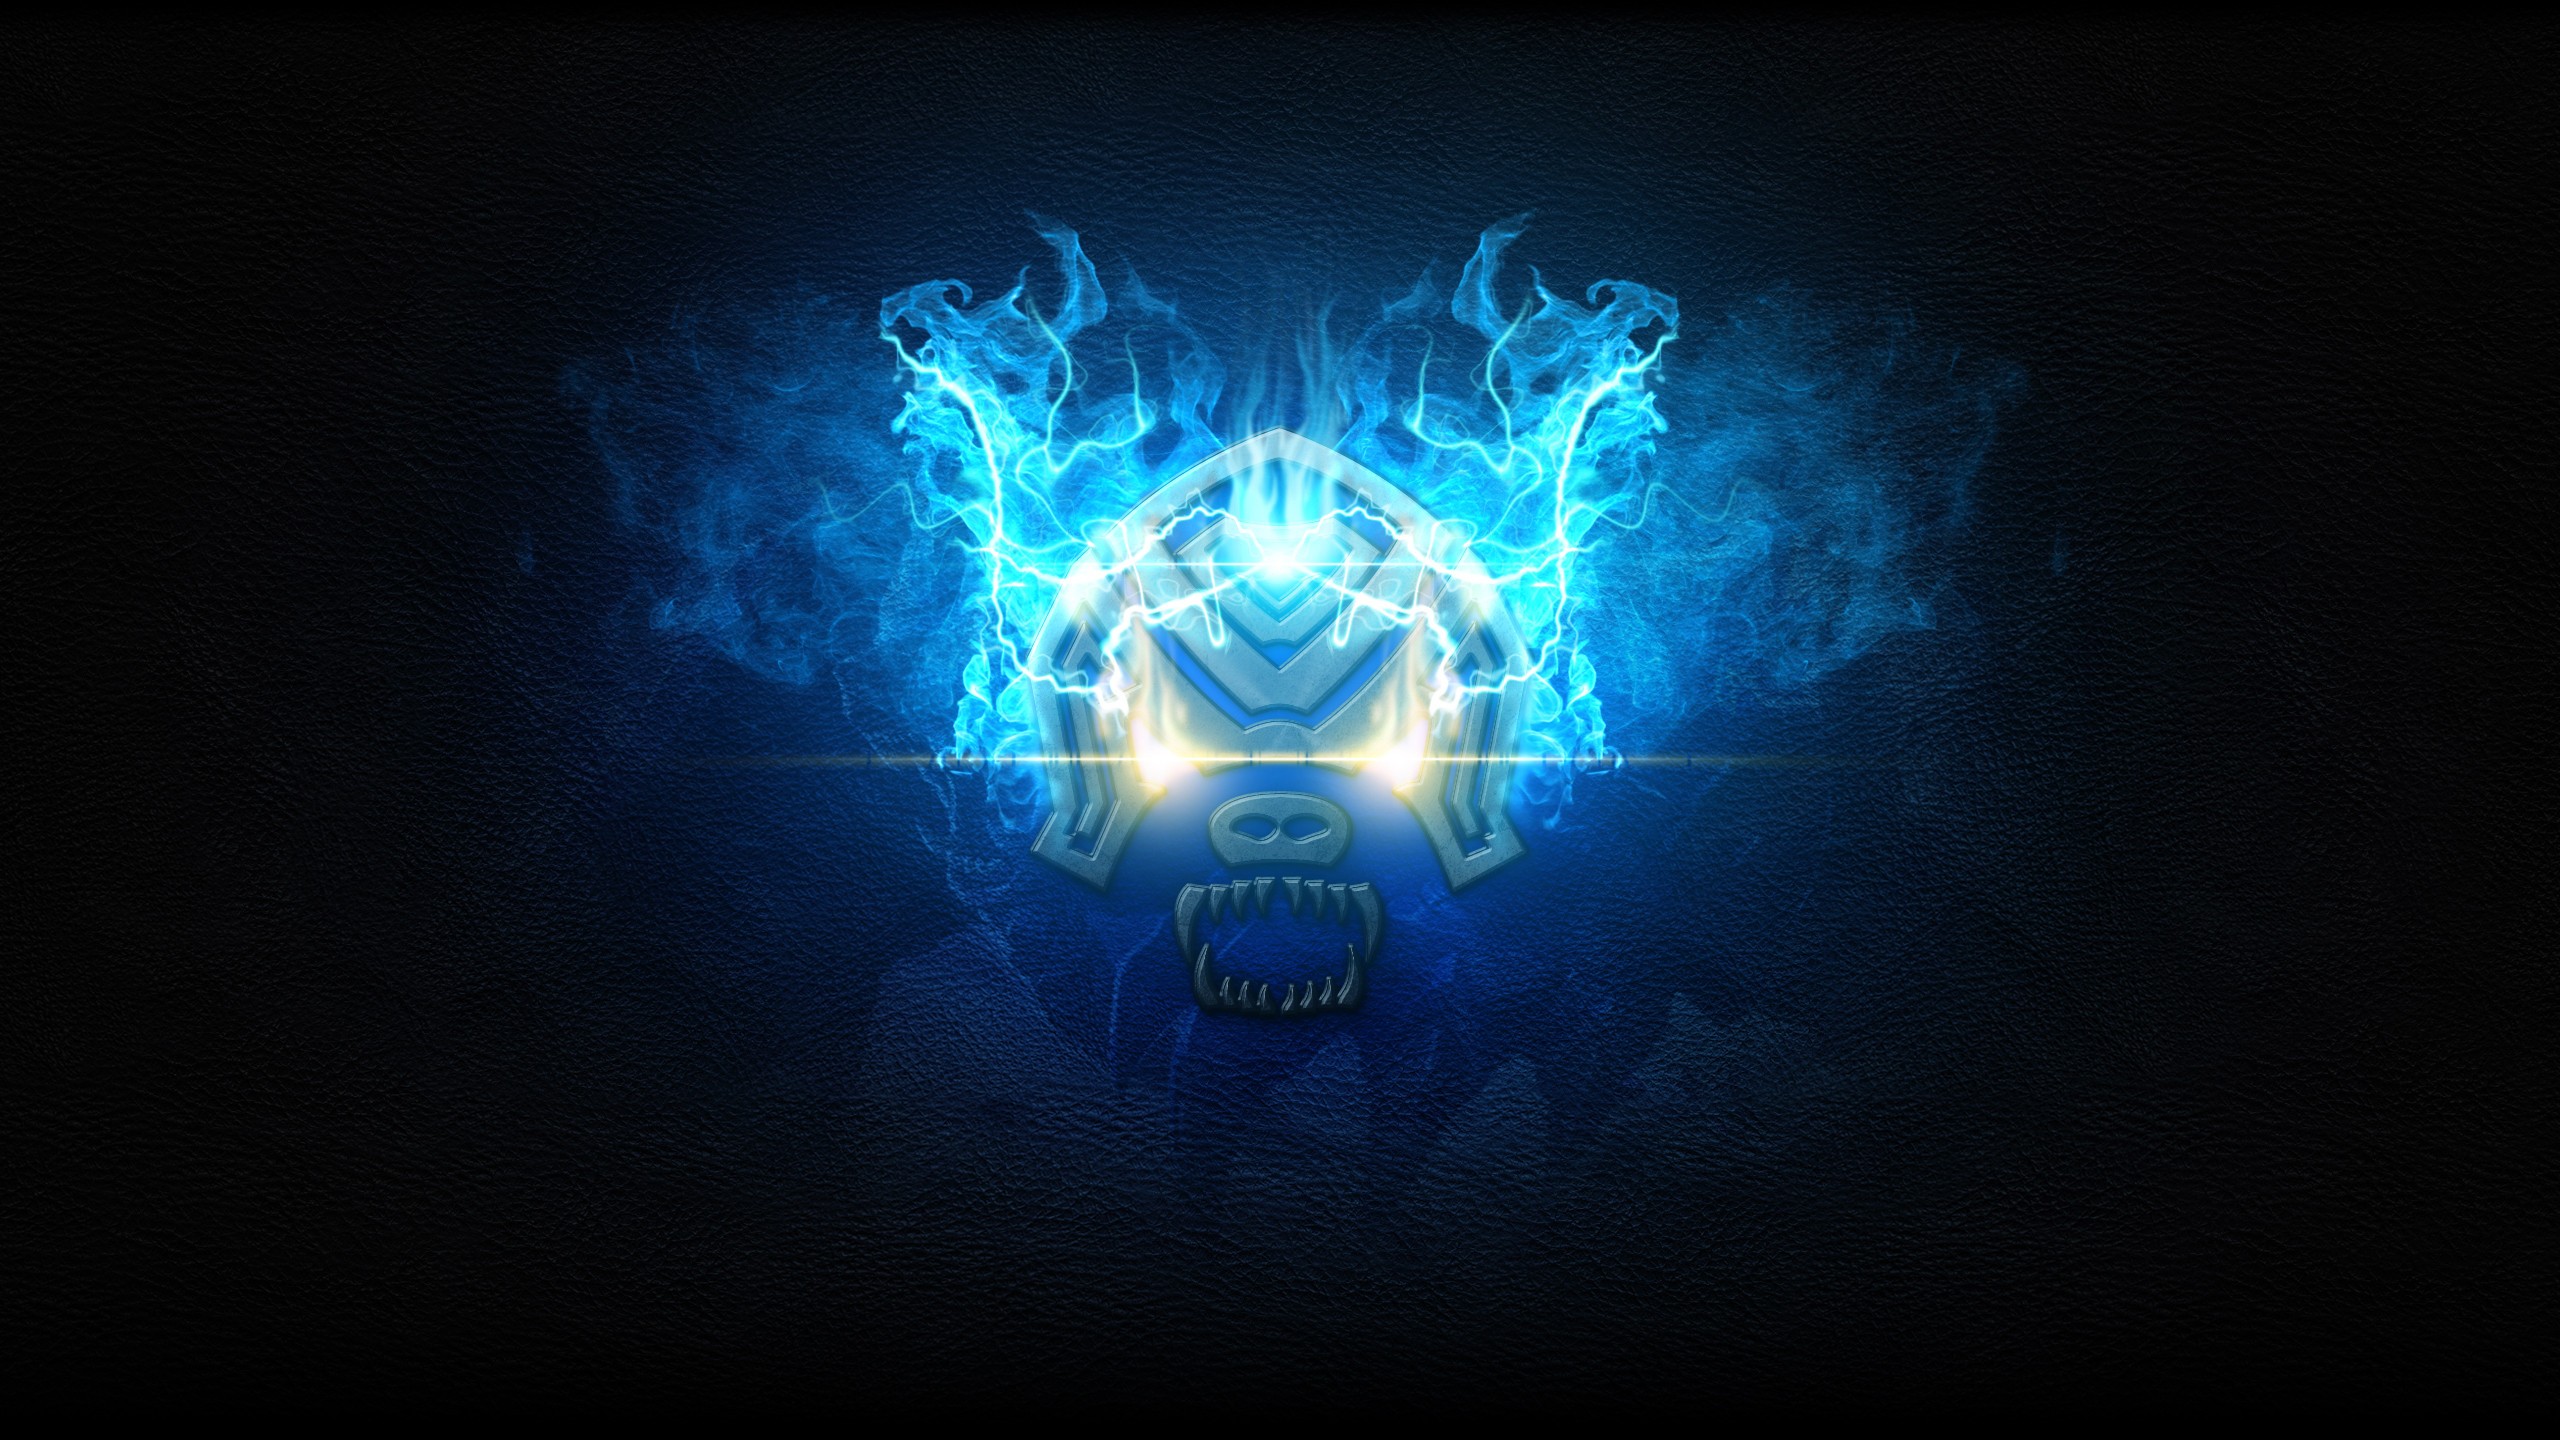 General 2560x1440 League of Legends Volibear (League of Legends) cyan PC gaming digital art Riot Games glowing eyes blue flames fire simple background video games